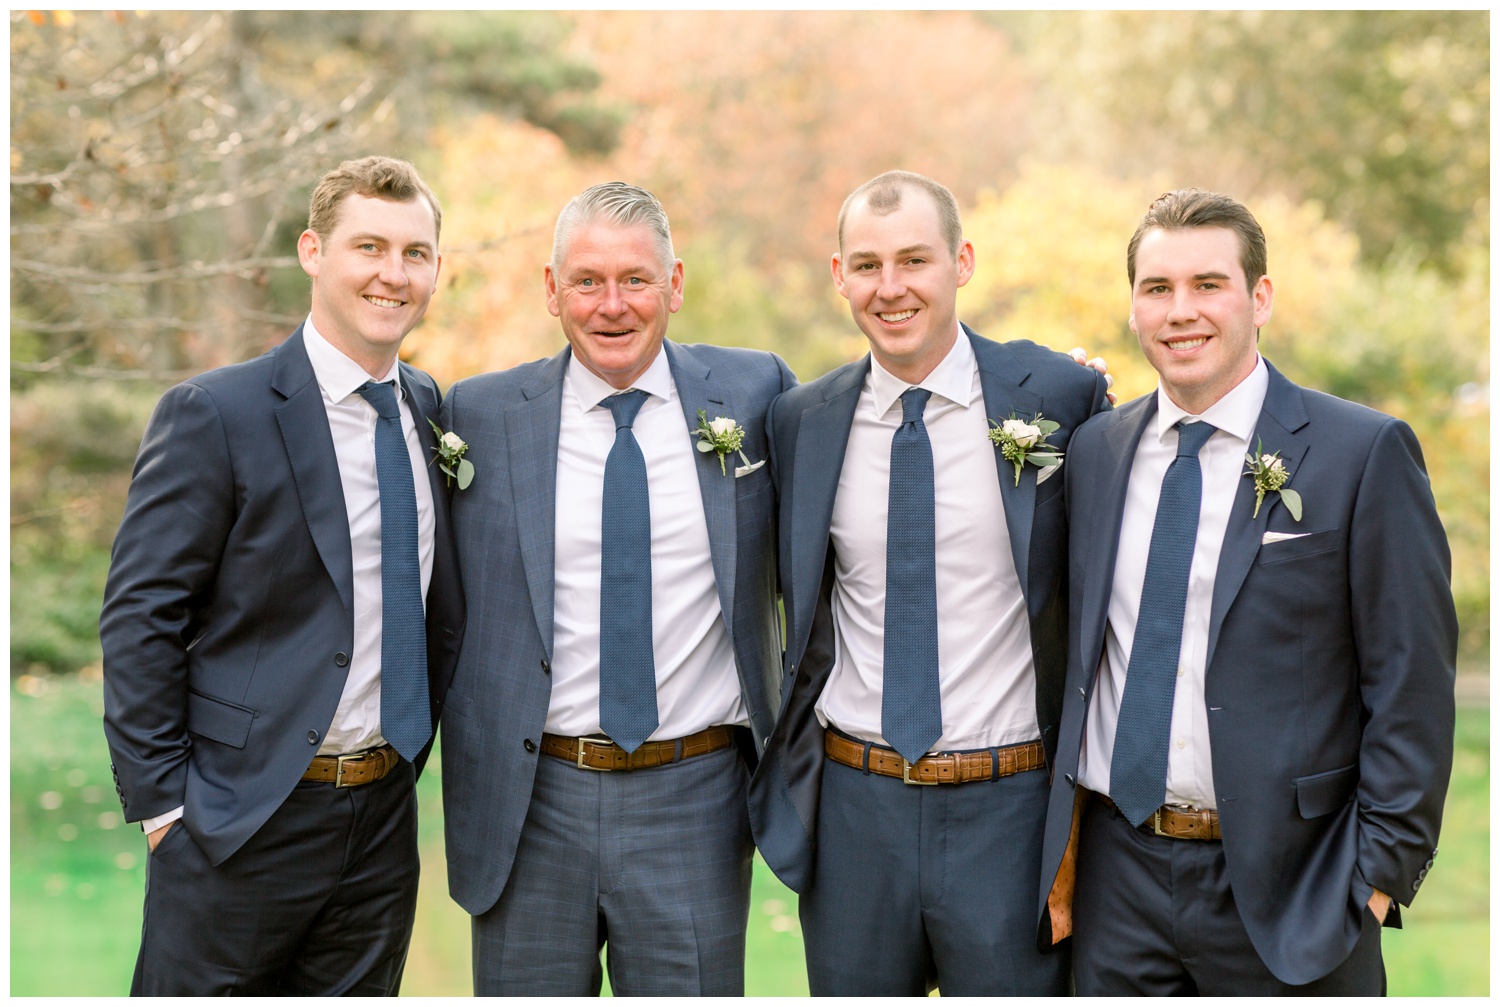 Groom with Dad and Brothers at Eden Park Cincinnati